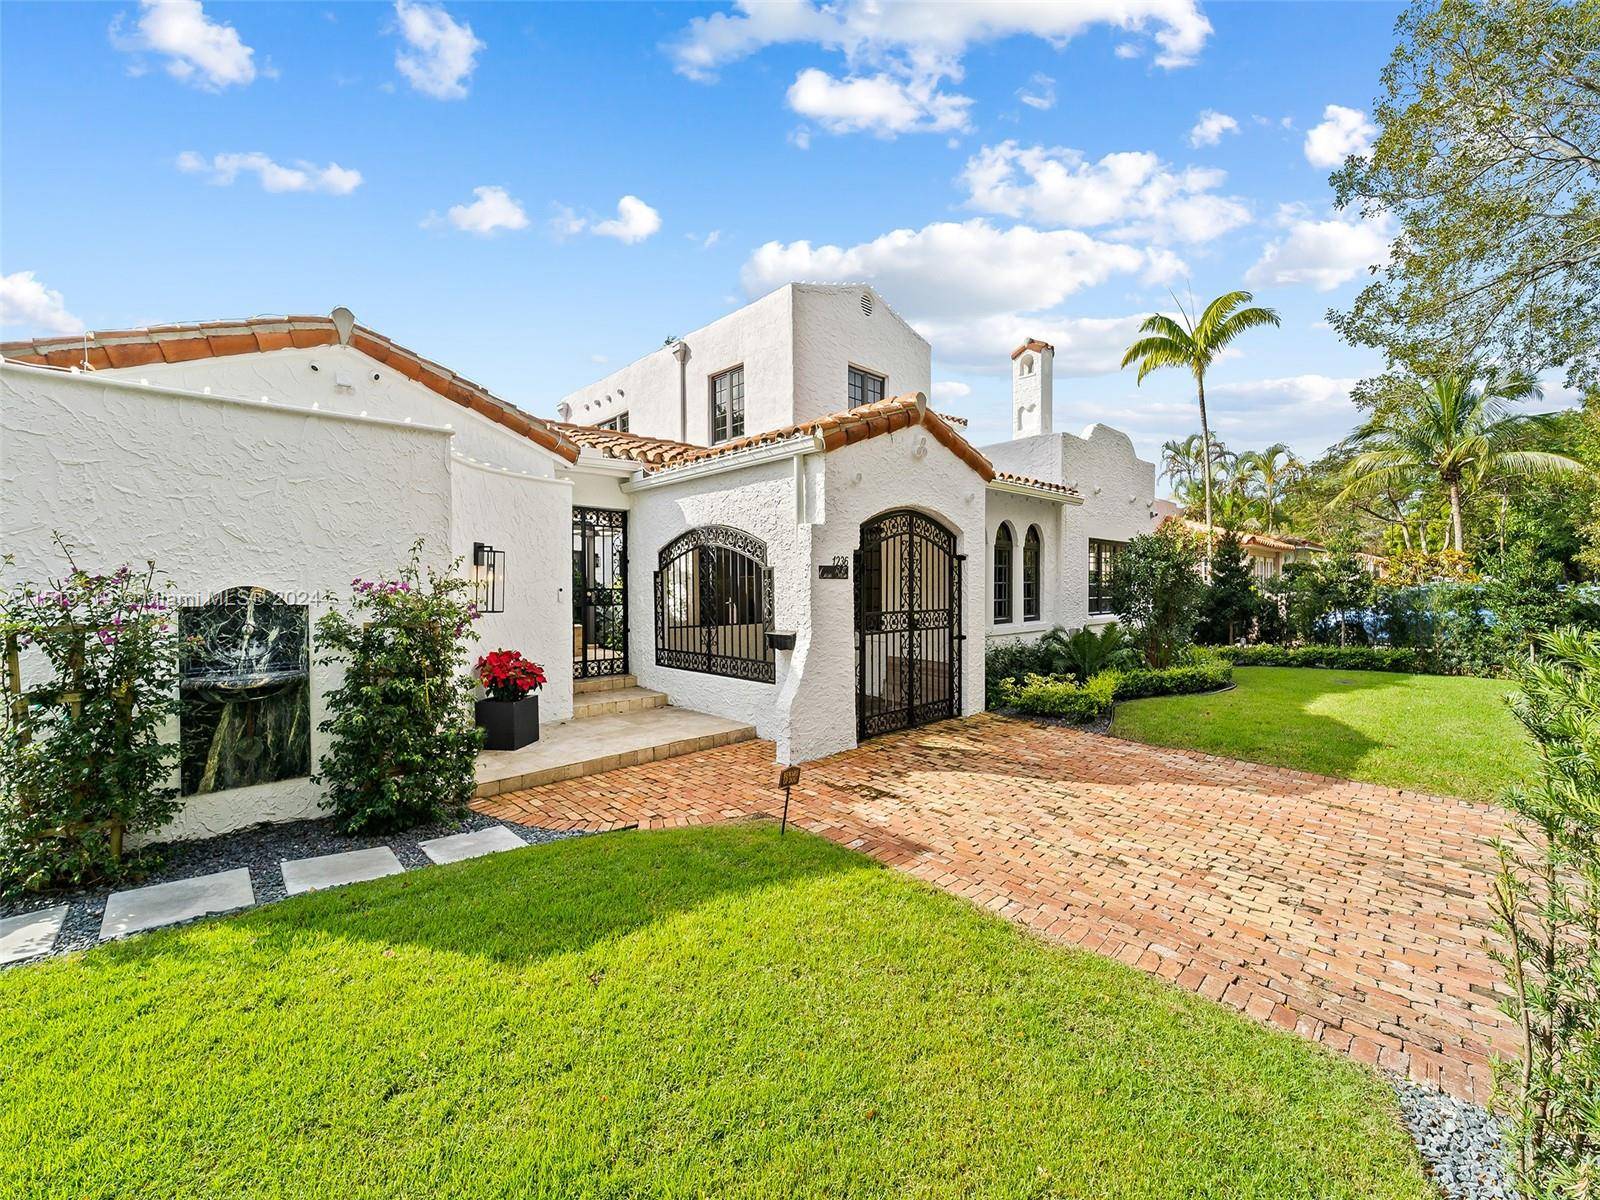 Introducing 1236 Obispo Ave, a luxurious haven nestled in the heart of Coral Gables.